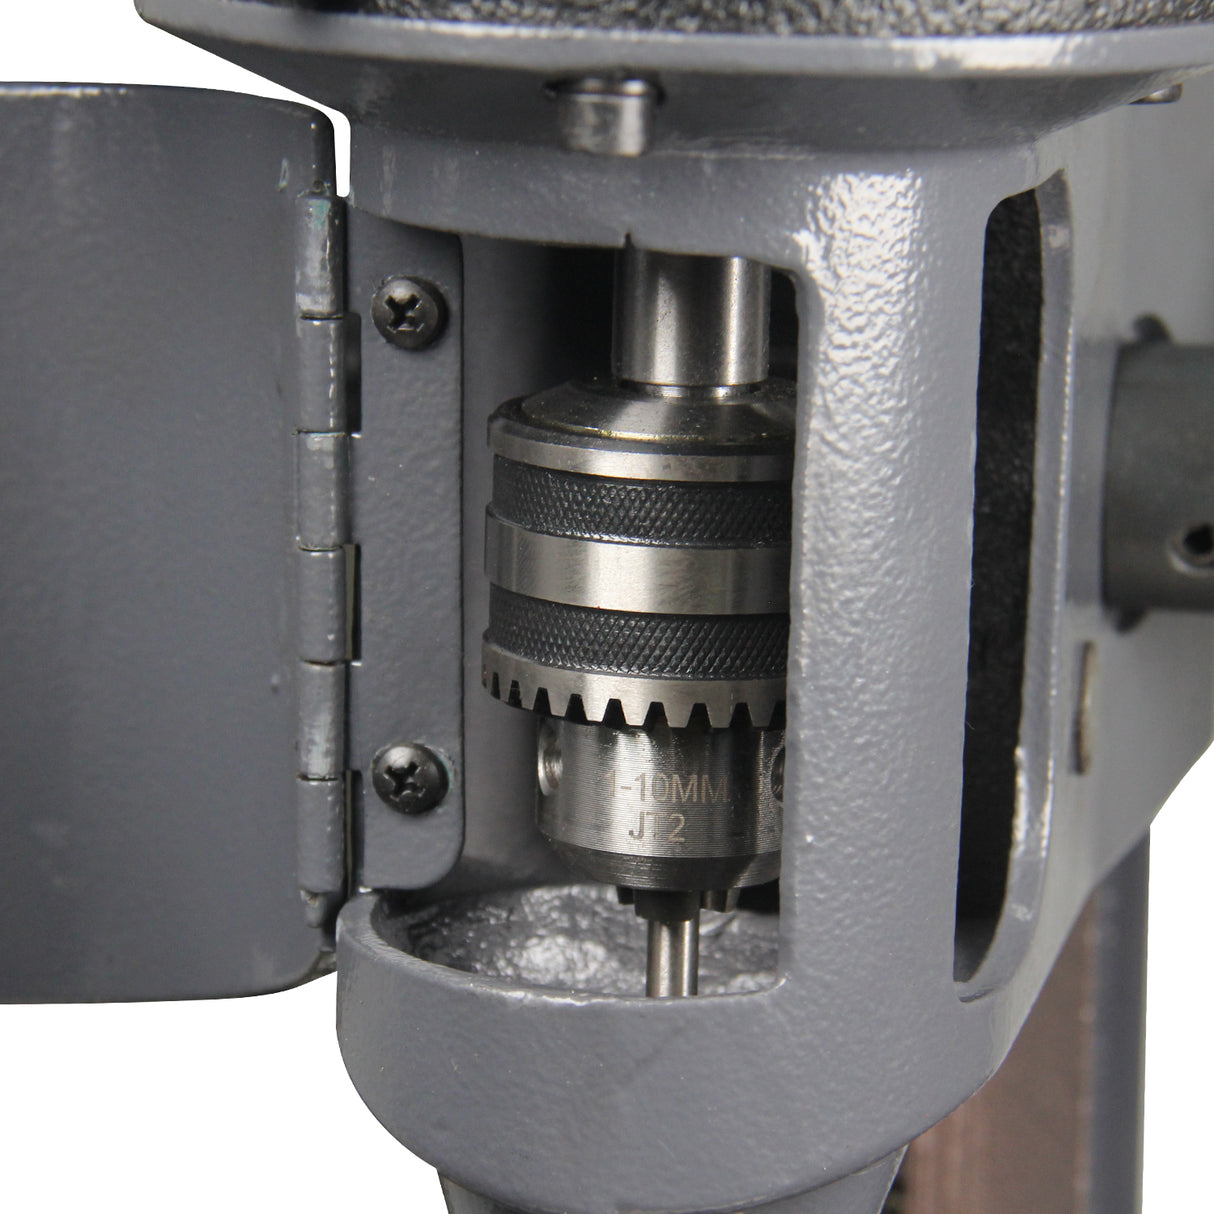 Dovetailed column ensures smooth and precise movement during operation